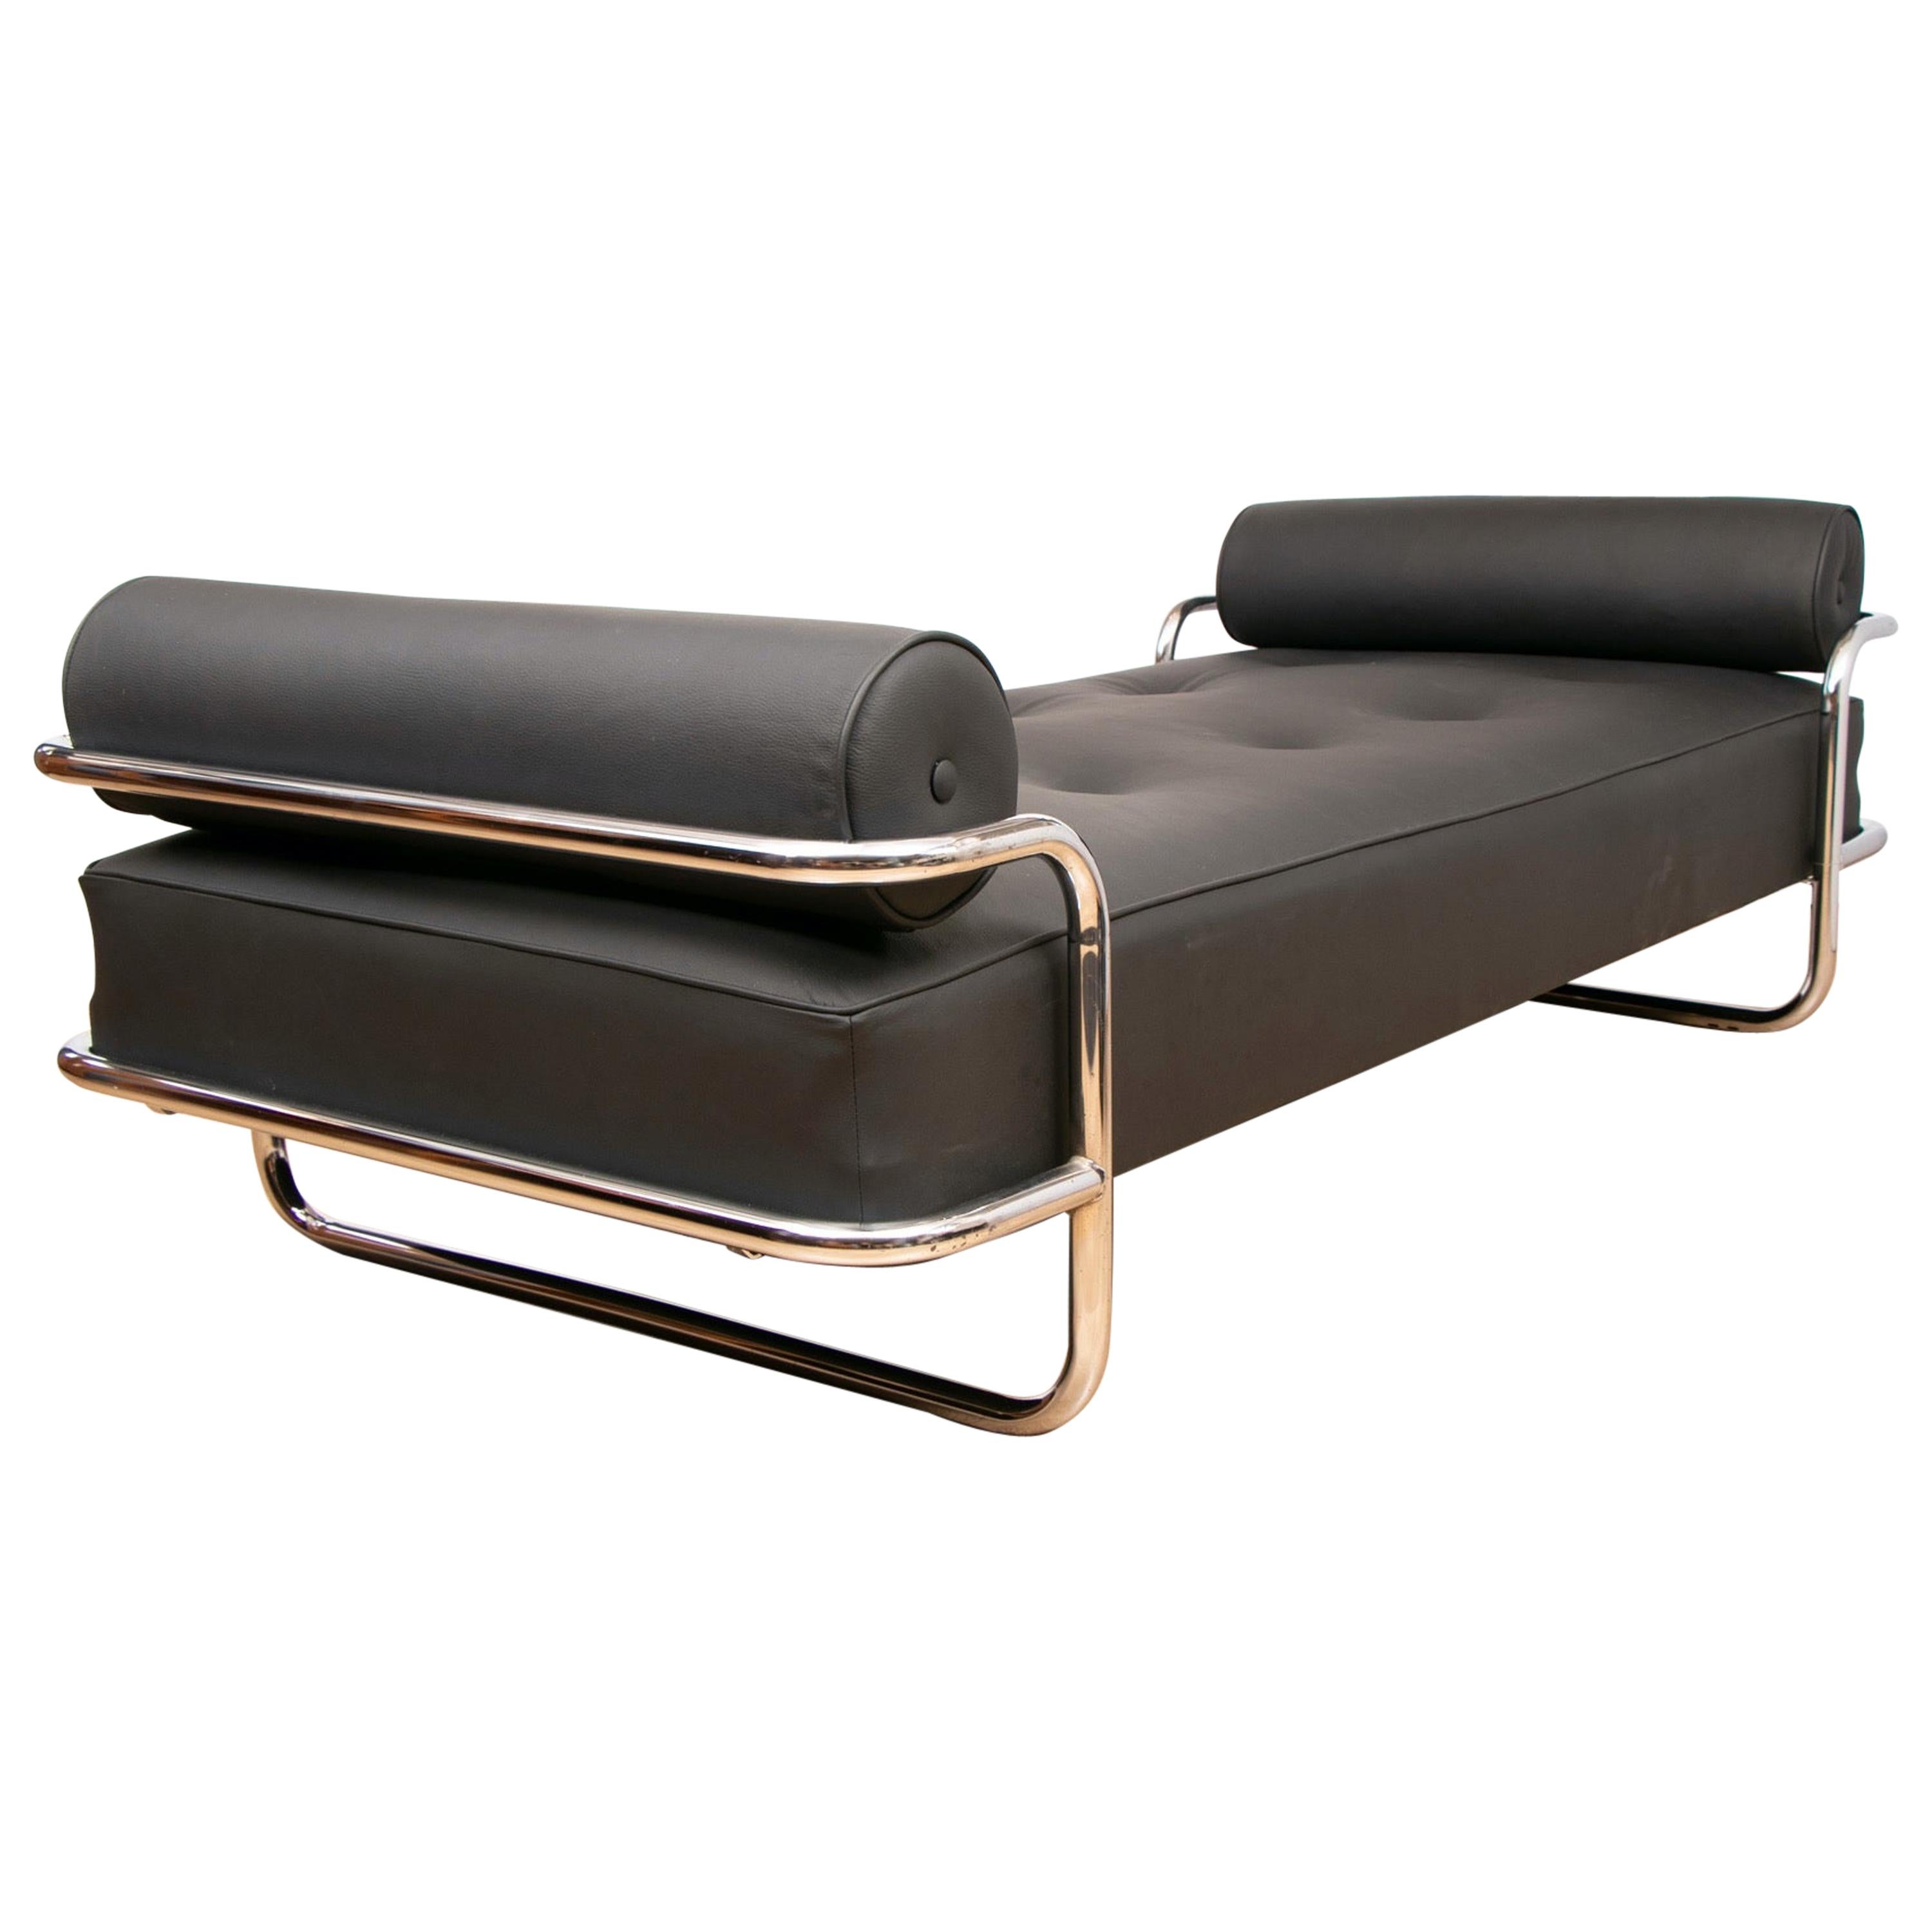 French Art Deco Chaise Longue Tubular Chrome Frame with Black Leather Upholstery For Sale